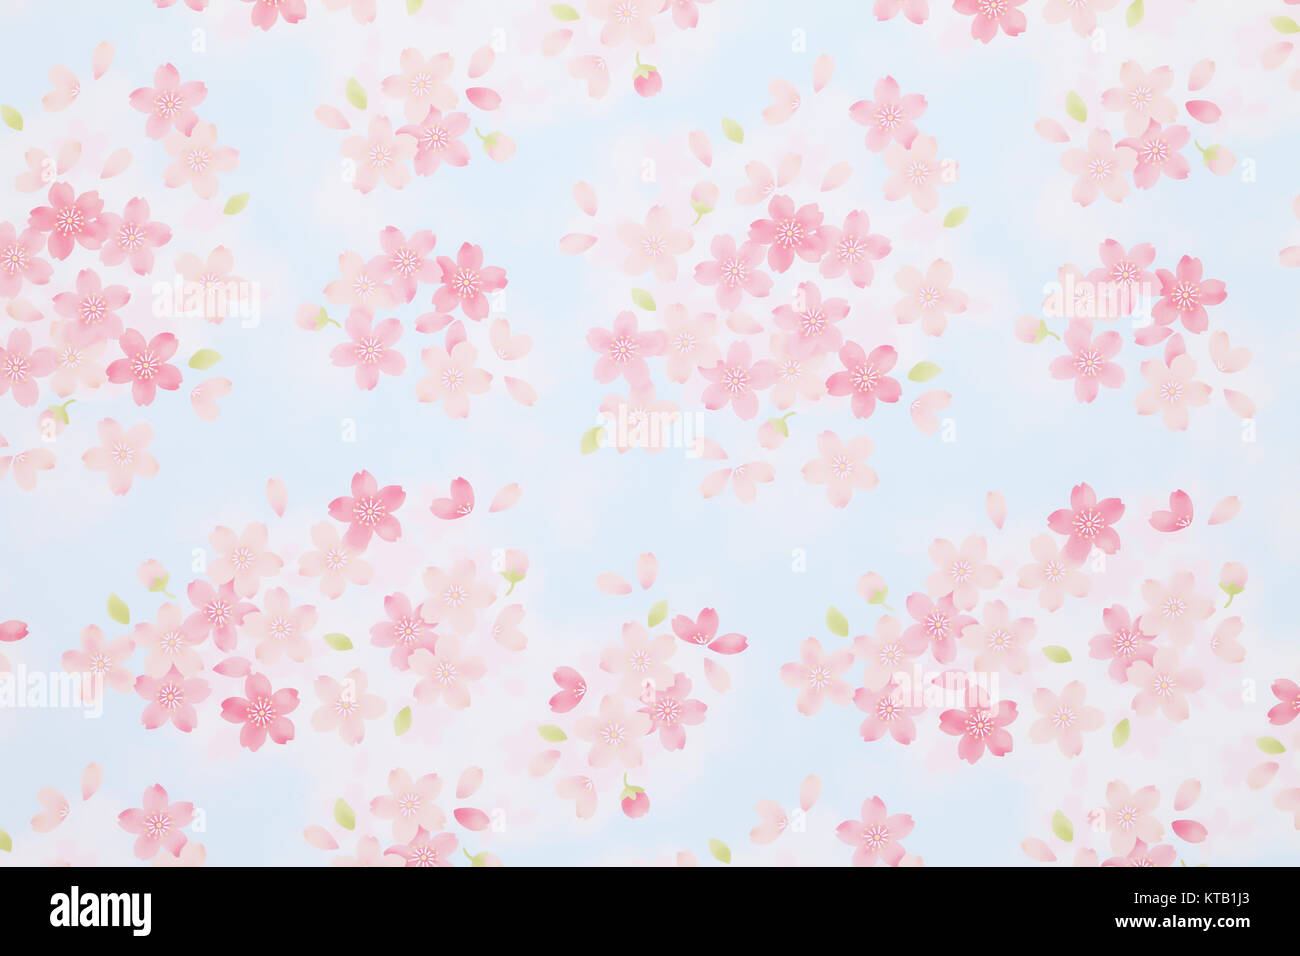 Light Gradient Pastel Pink Textured Japanese Wrapping Paper Background  Stock Photo, Picture and Royalty Free Image. Image 73275804.